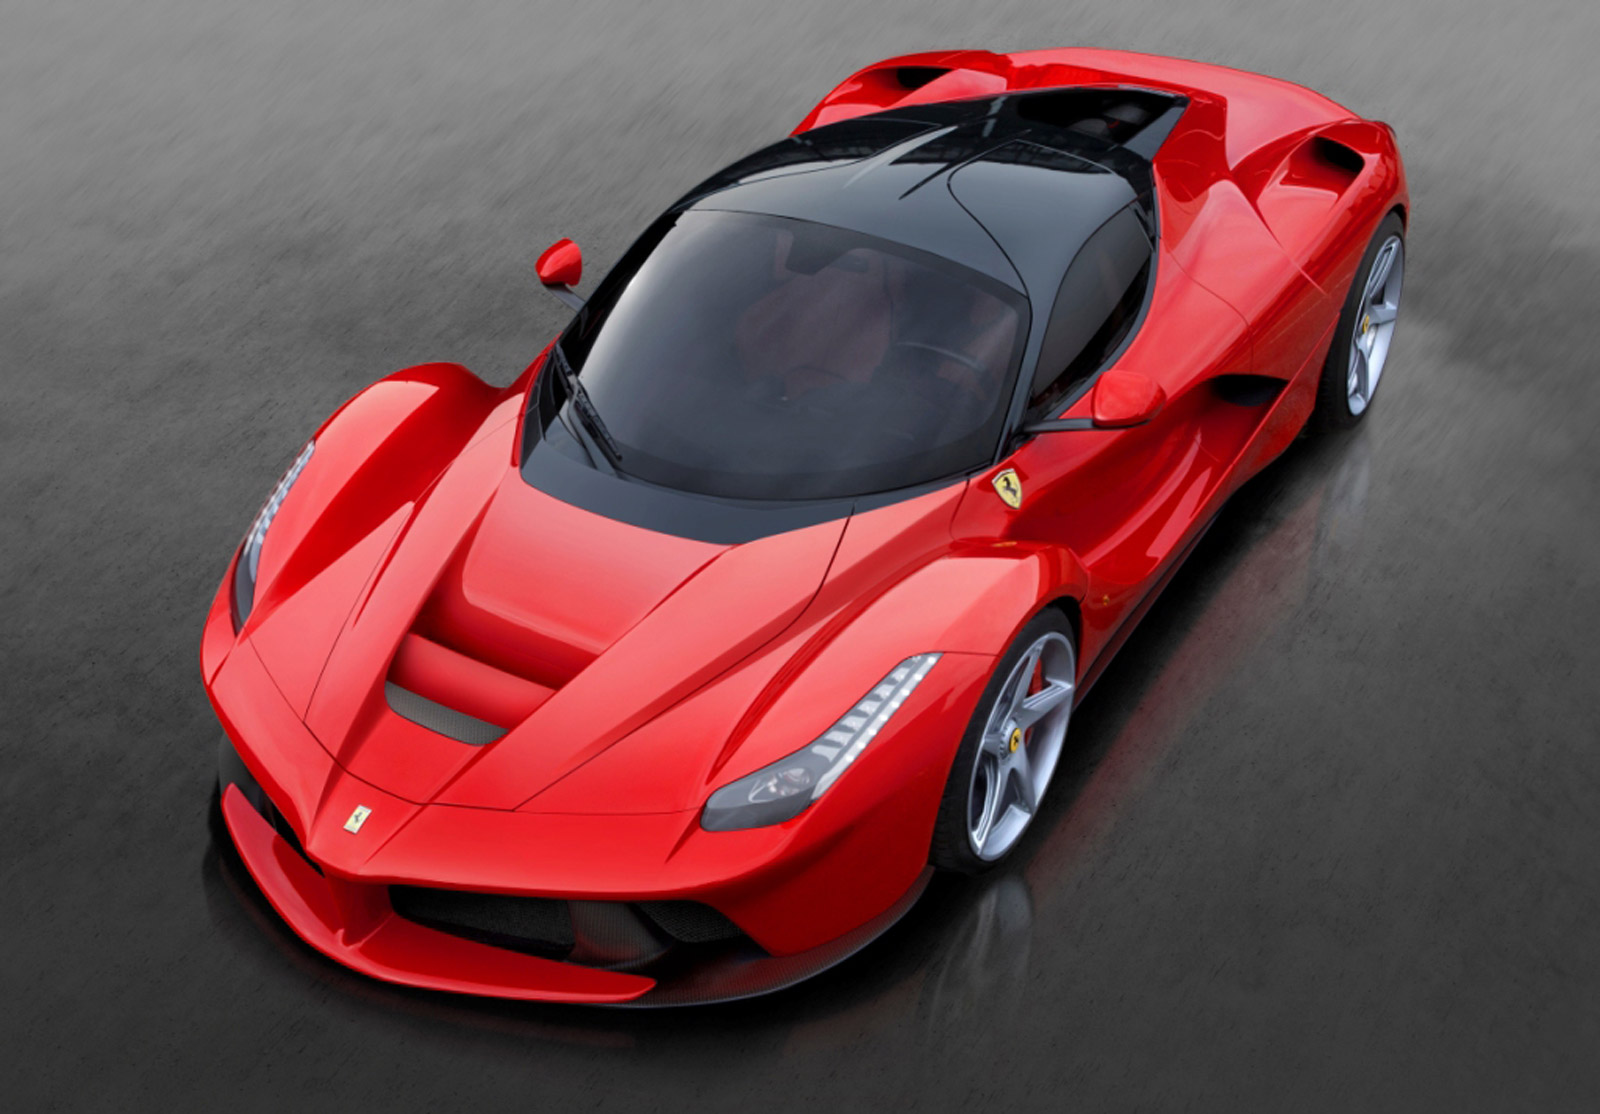 new flagship is the LaFerrari supercar